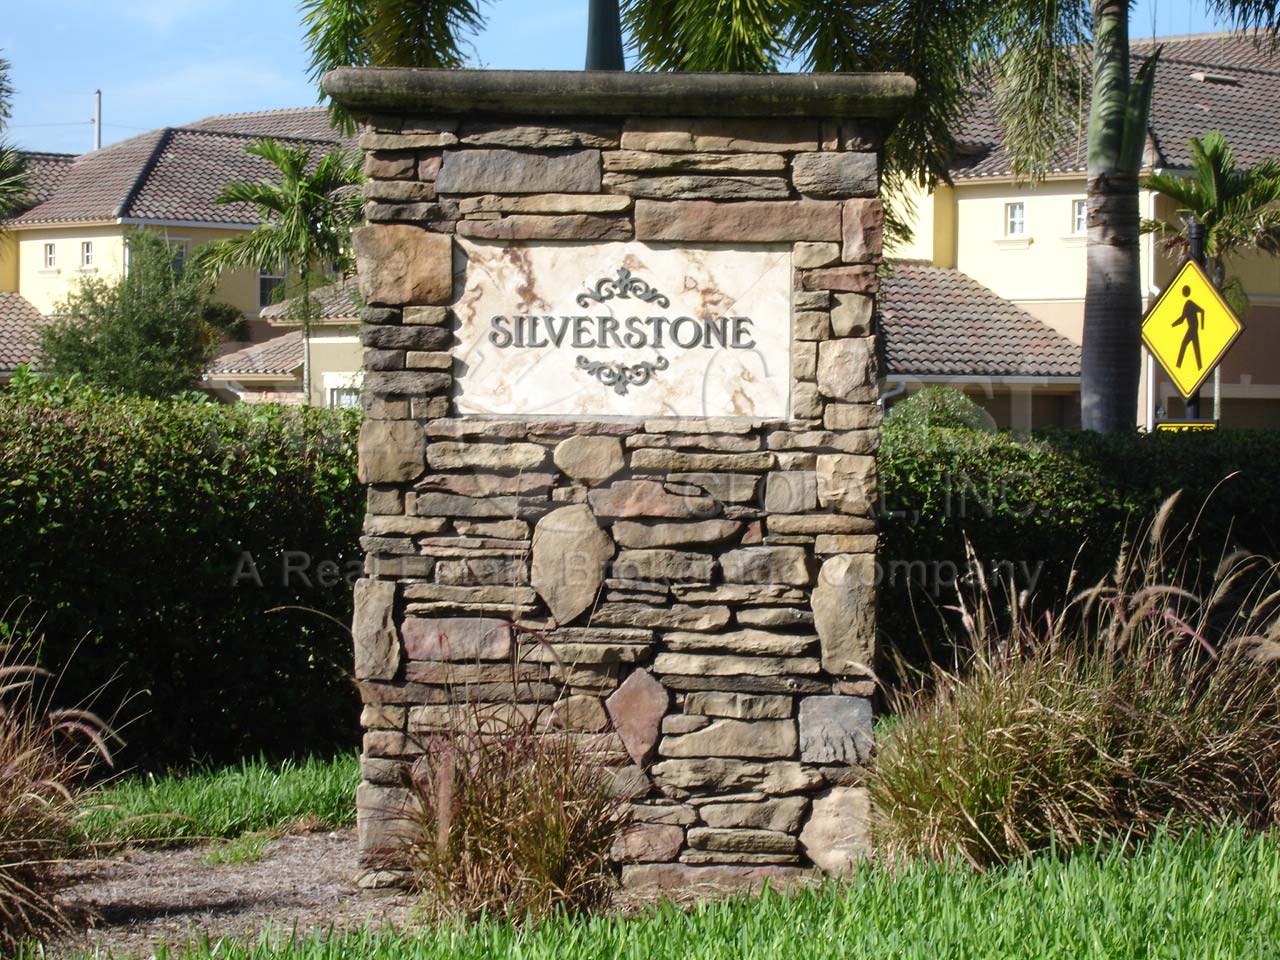 Silverstone entrance sign